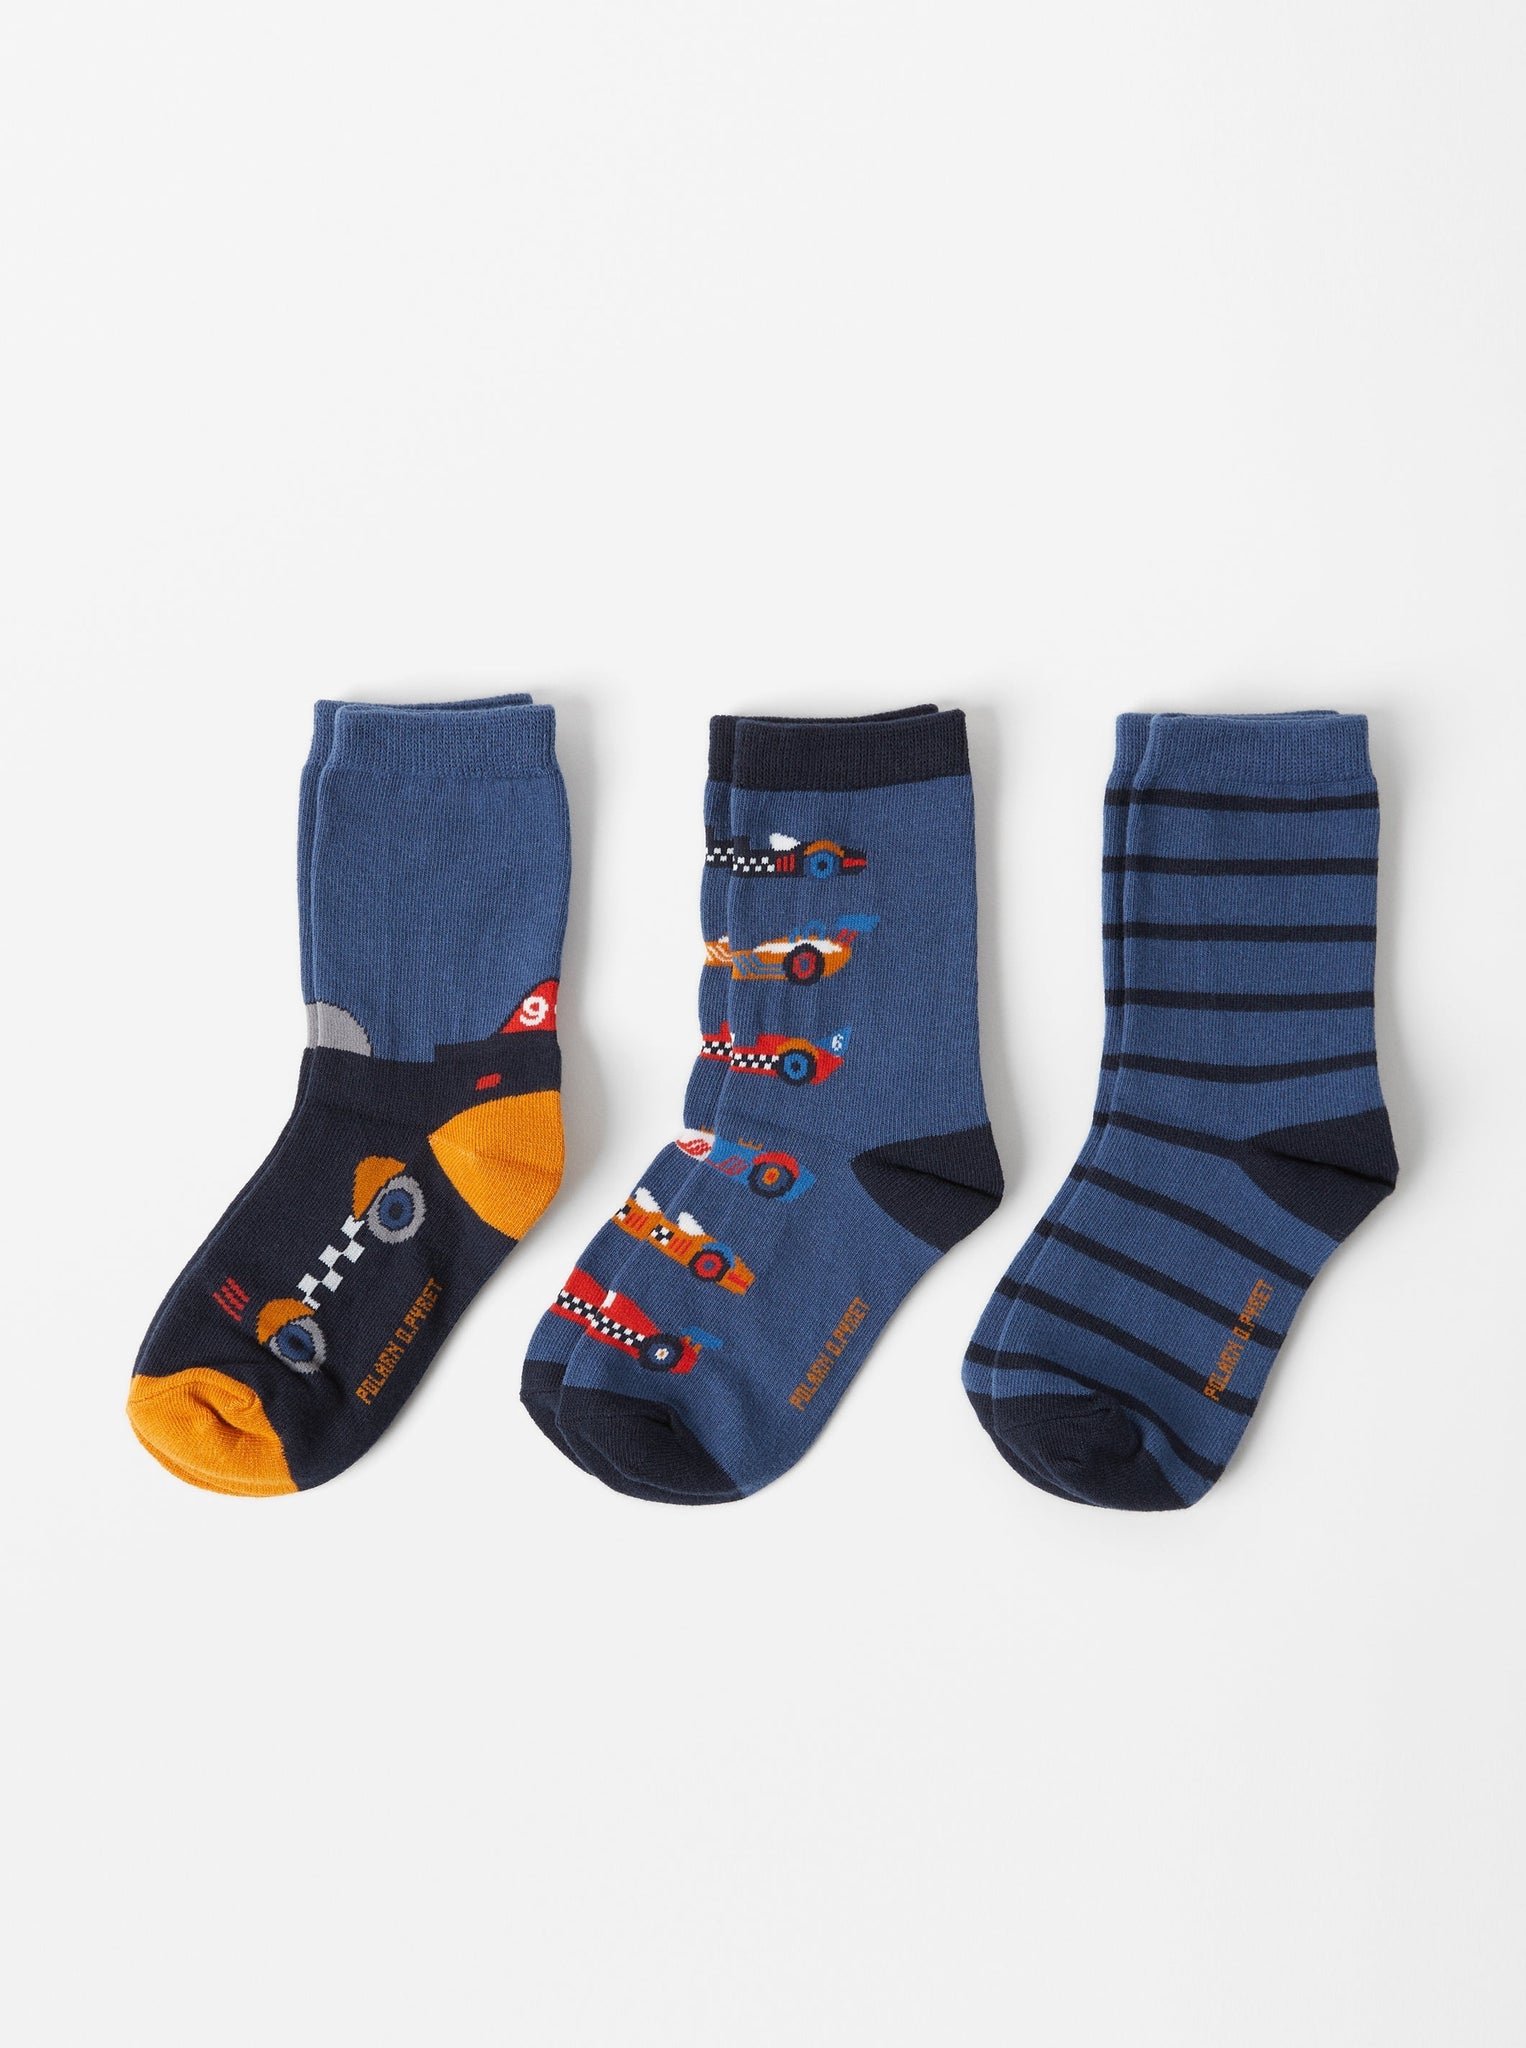 Blue Cotton Kids Socks Multipack from the Polarn O. Pyret Kidswear collection. Ethically produced kids clothing.